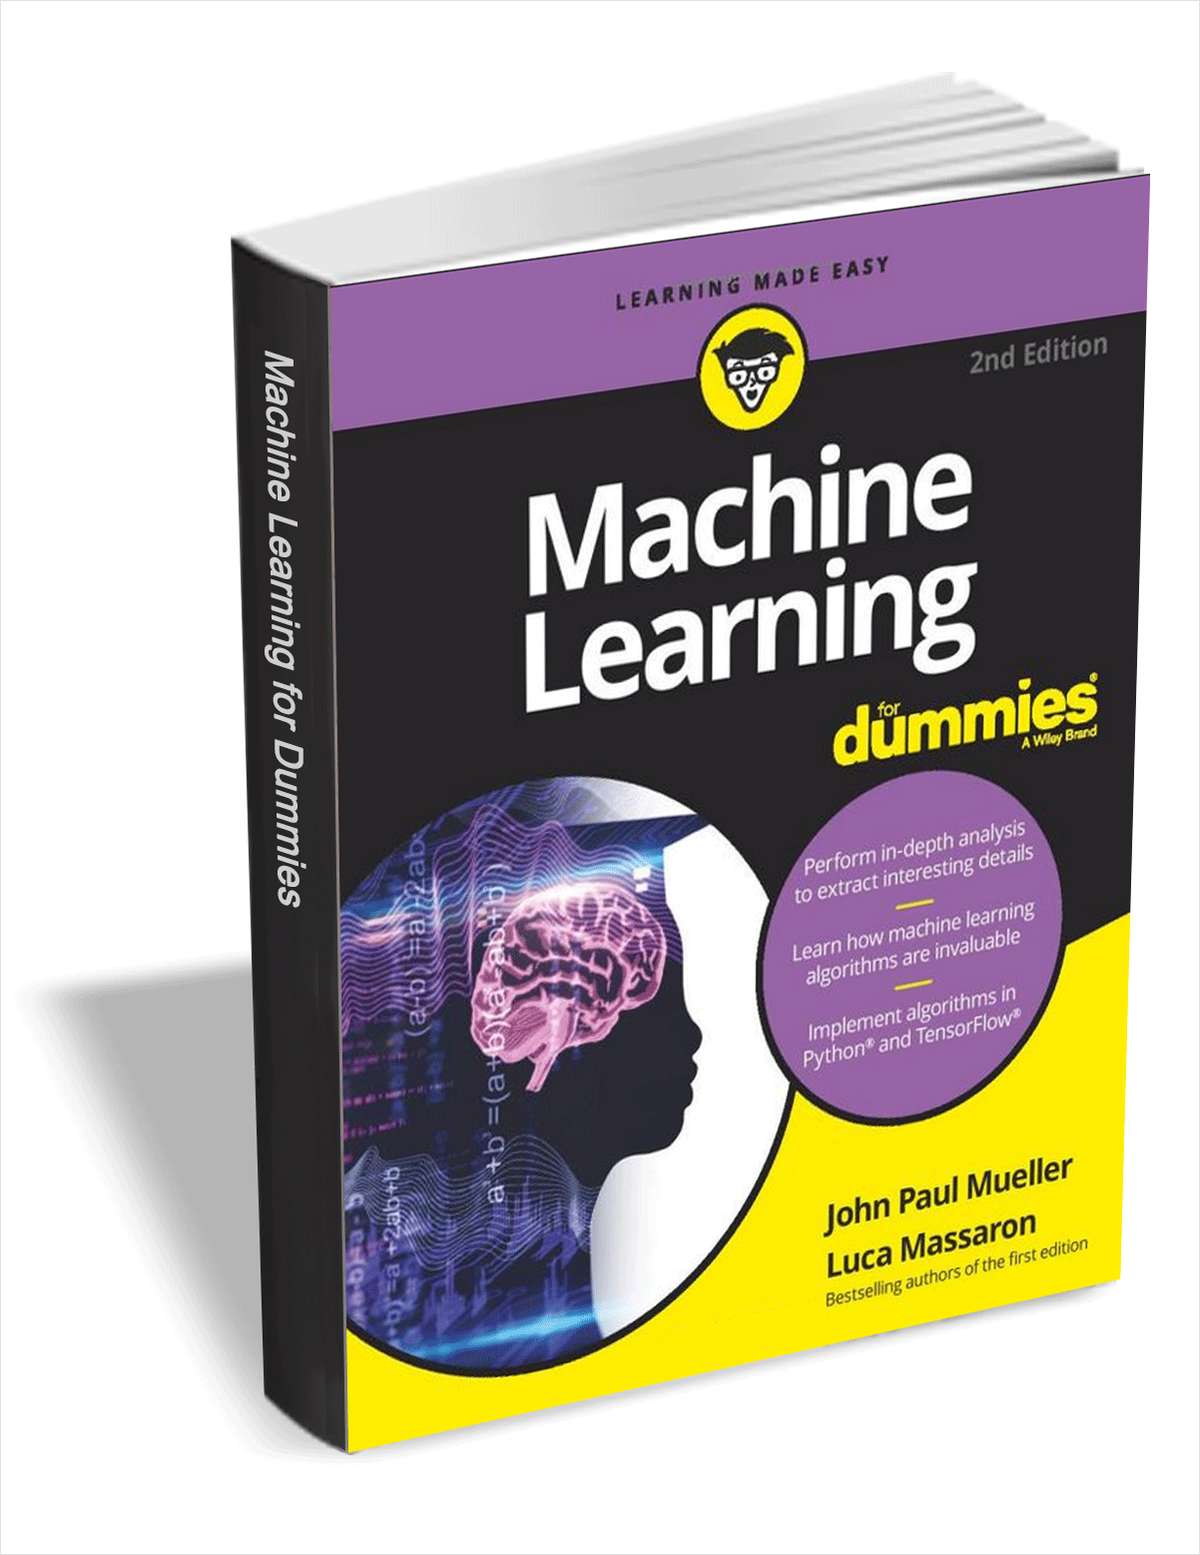 Machine Learning For Dummies, 2nd Edition ($18.00 Value) FREE for a Limited Time